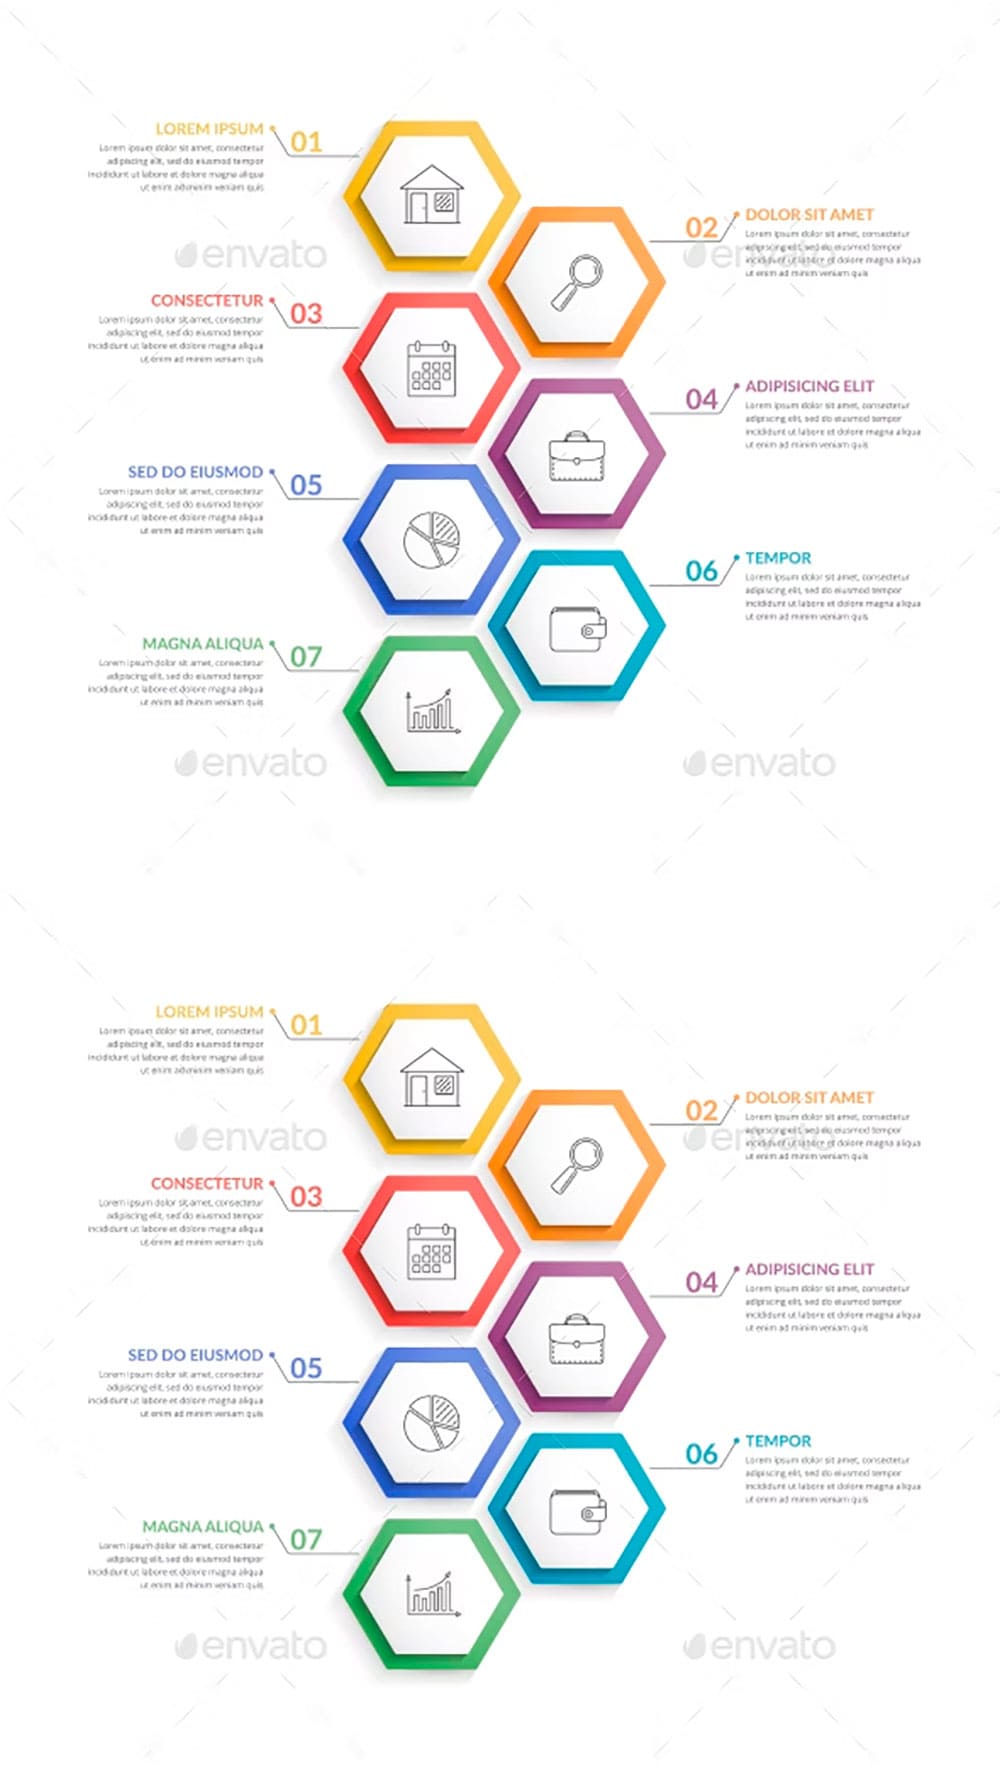 Infographic template with 7 hexagons, picture for pinterest.